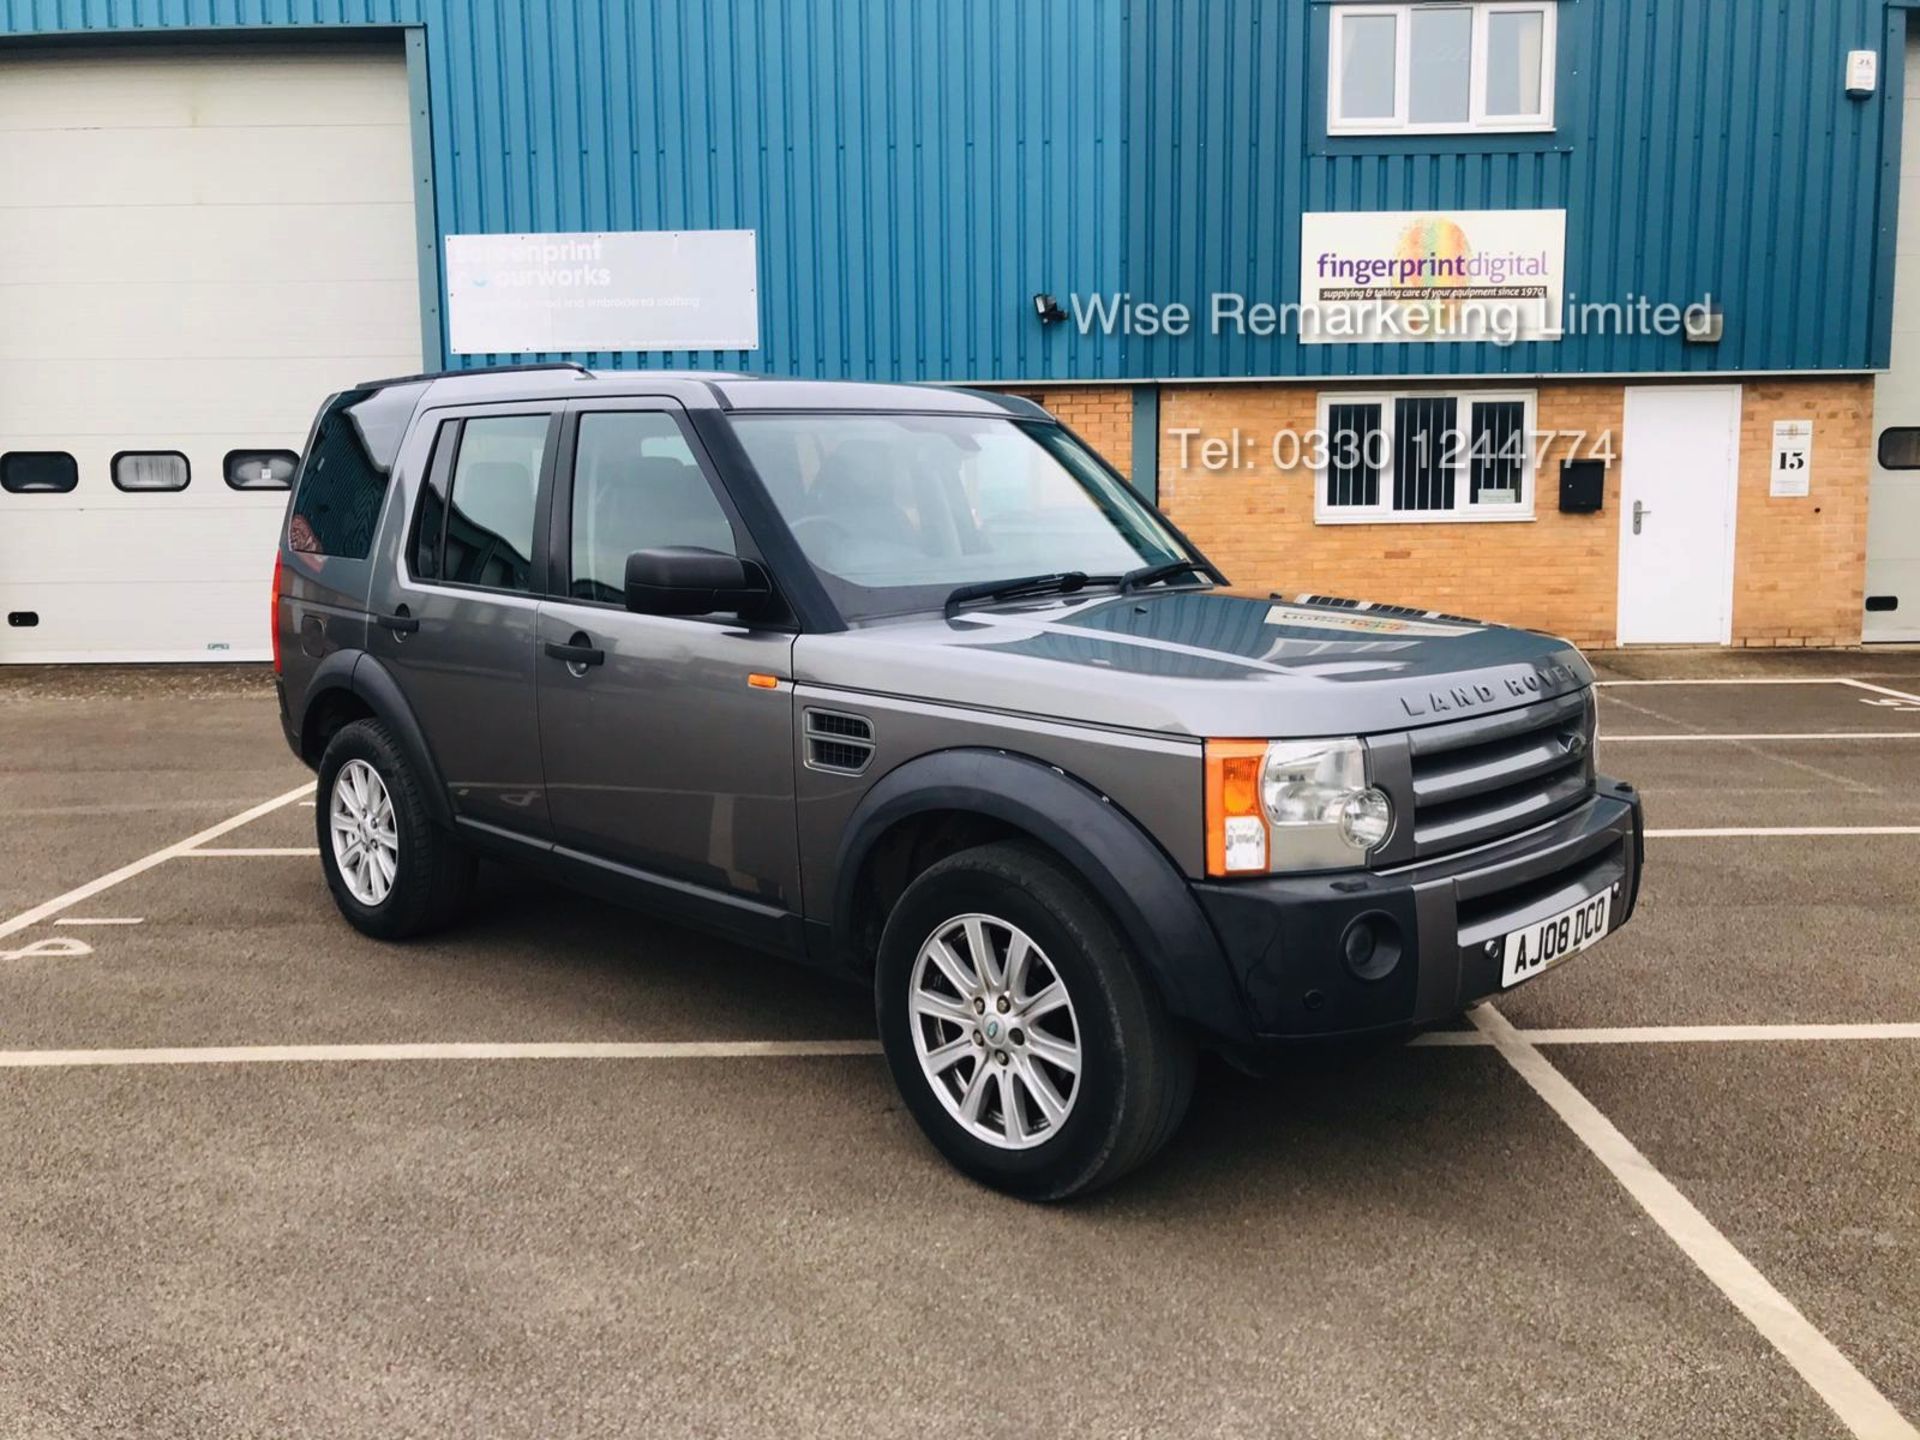 Land Rover Discovery SE 2.7 TDV6 Automatic - 2008 08 Reg - 7 seats - 1 Keeper - Service History